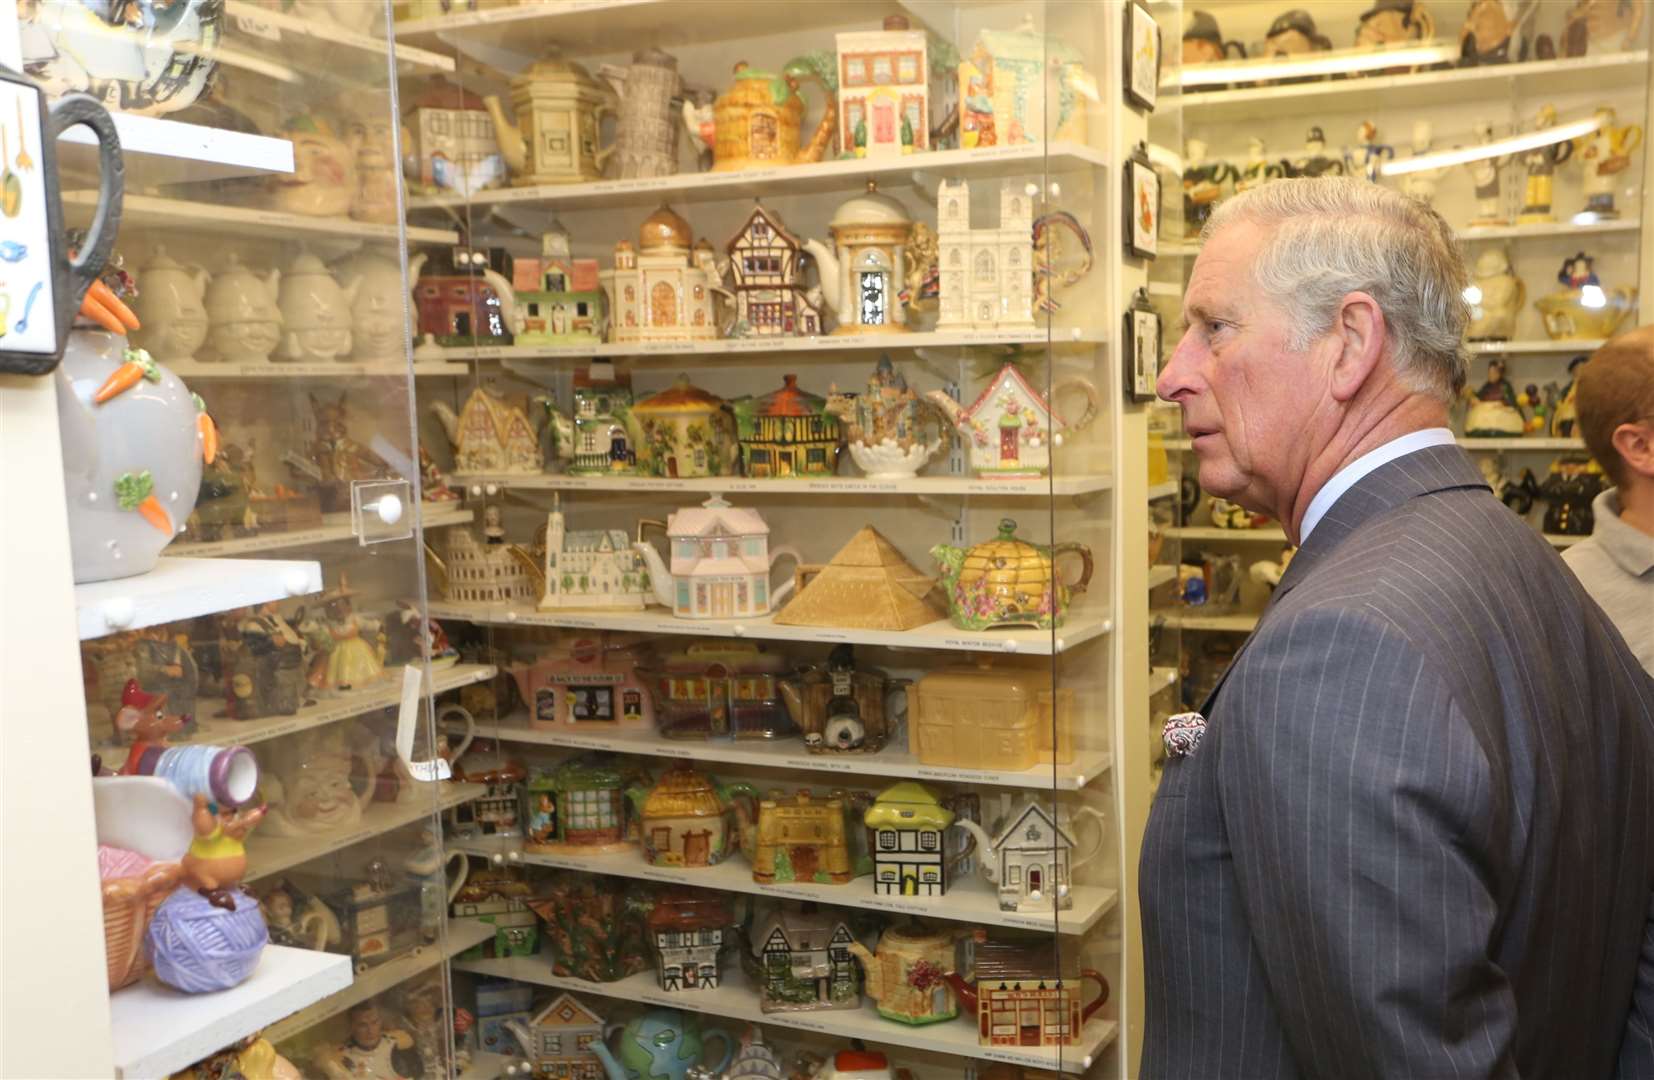 HRH Prince of Wales looks bemused at the teapots back in 2014 Picture by: Martin Apps